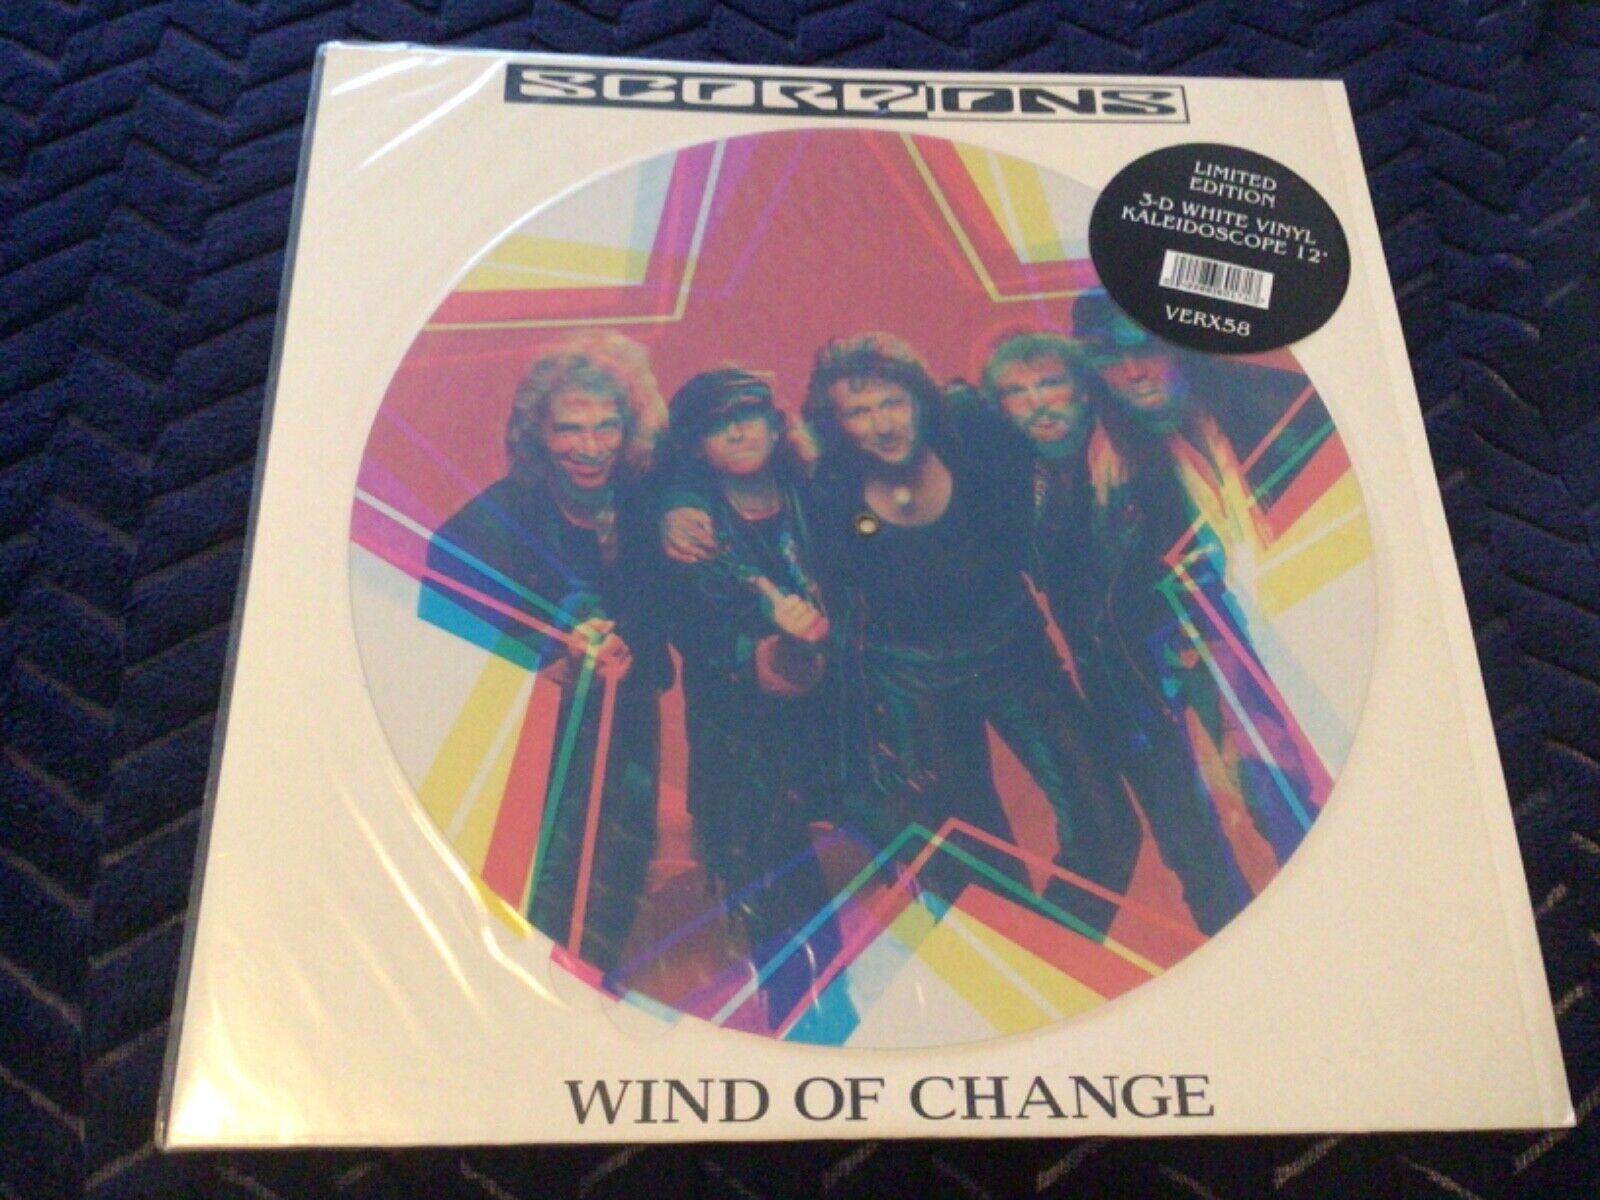 Scorpions Wind Of Change Limited Edition 3-D White Vinyl 12 Inch Single